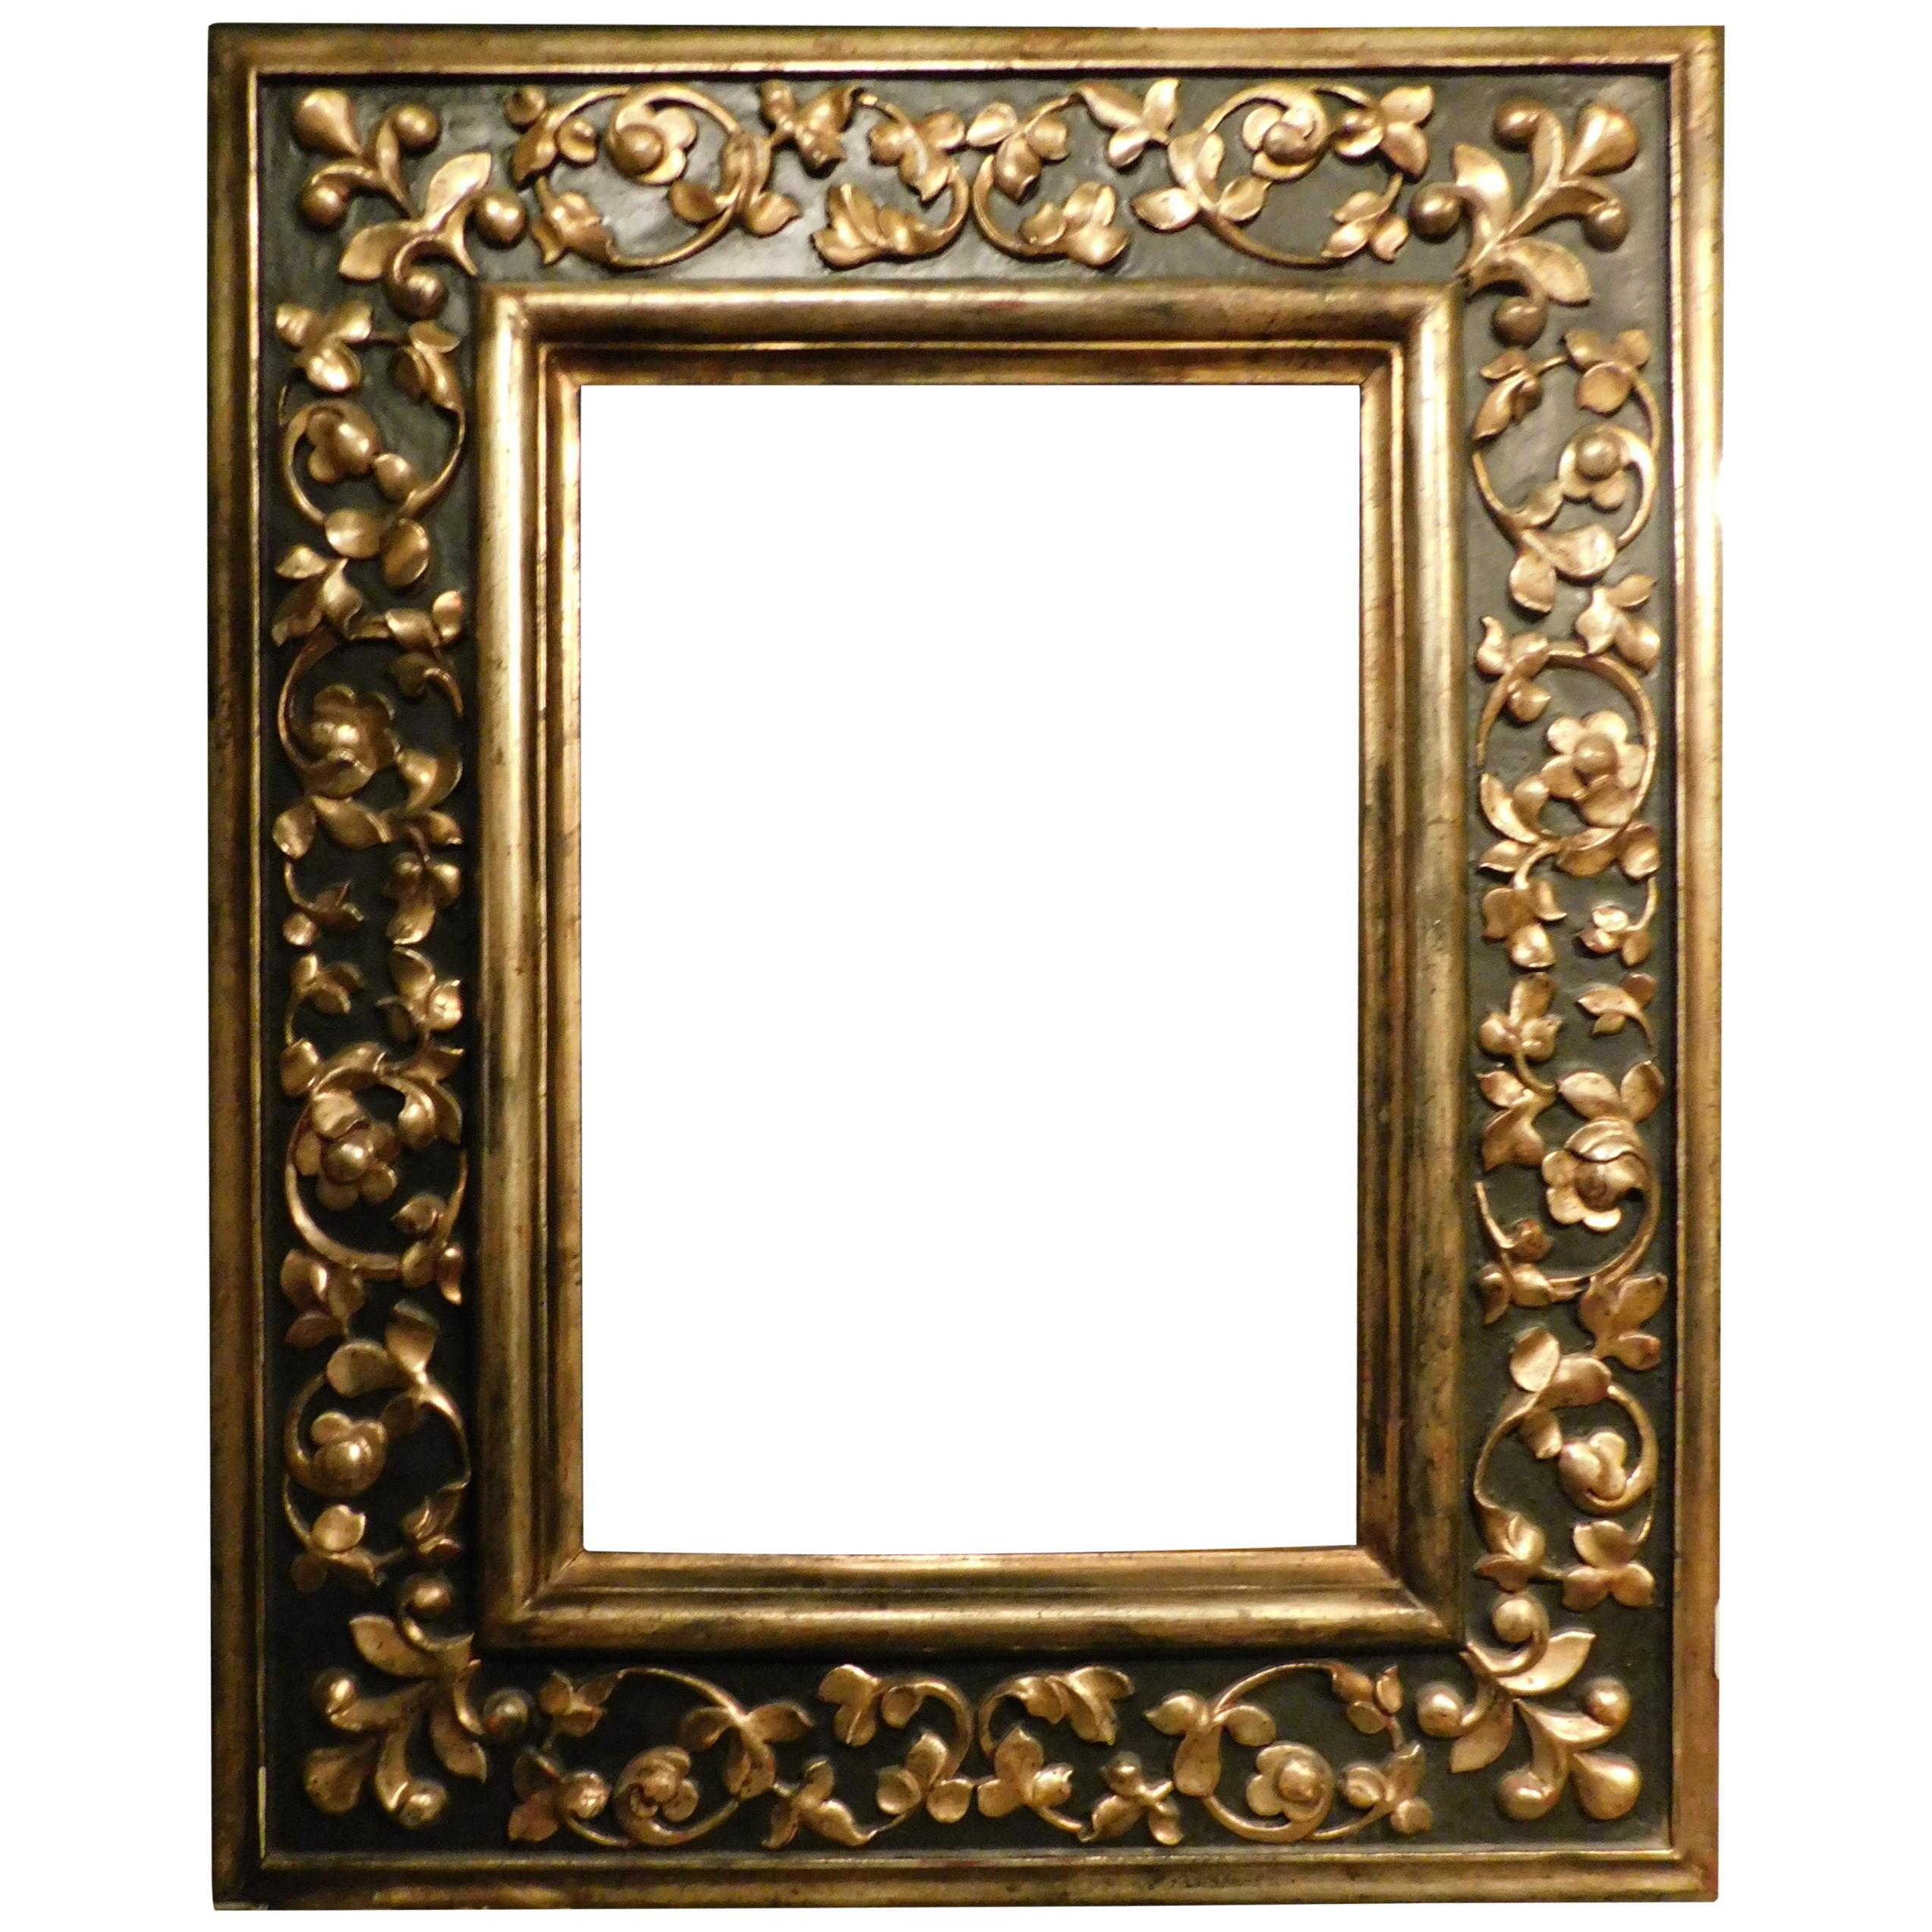 19th Century Antique Frame Carved and Decorated with Golden Floral Motifs